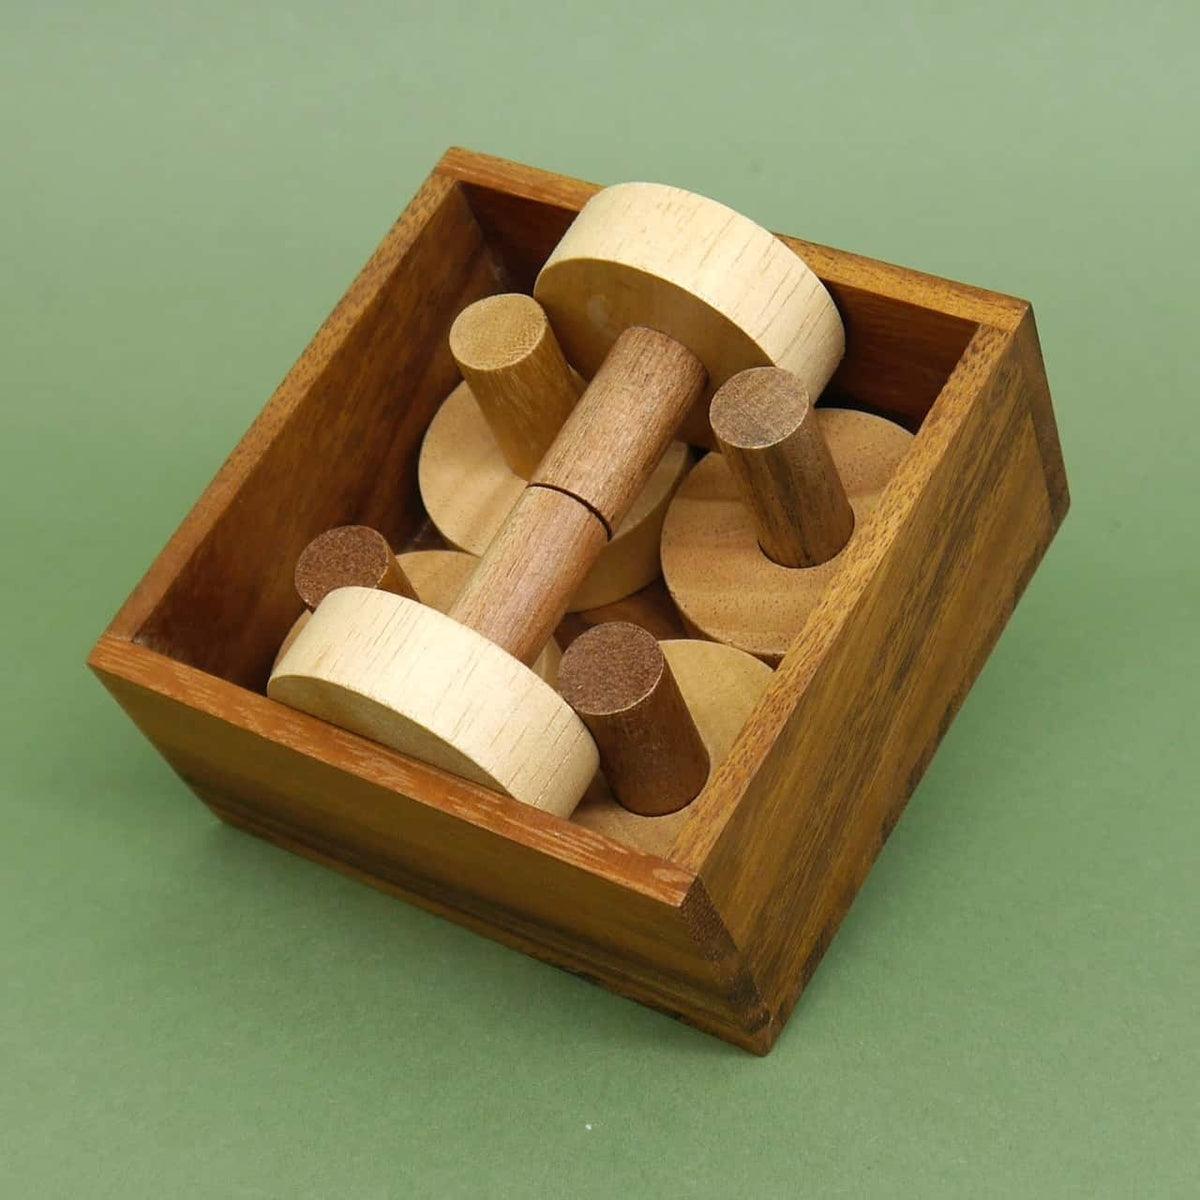 CURLING BOX - das etwas anderes Packing-Puzzle